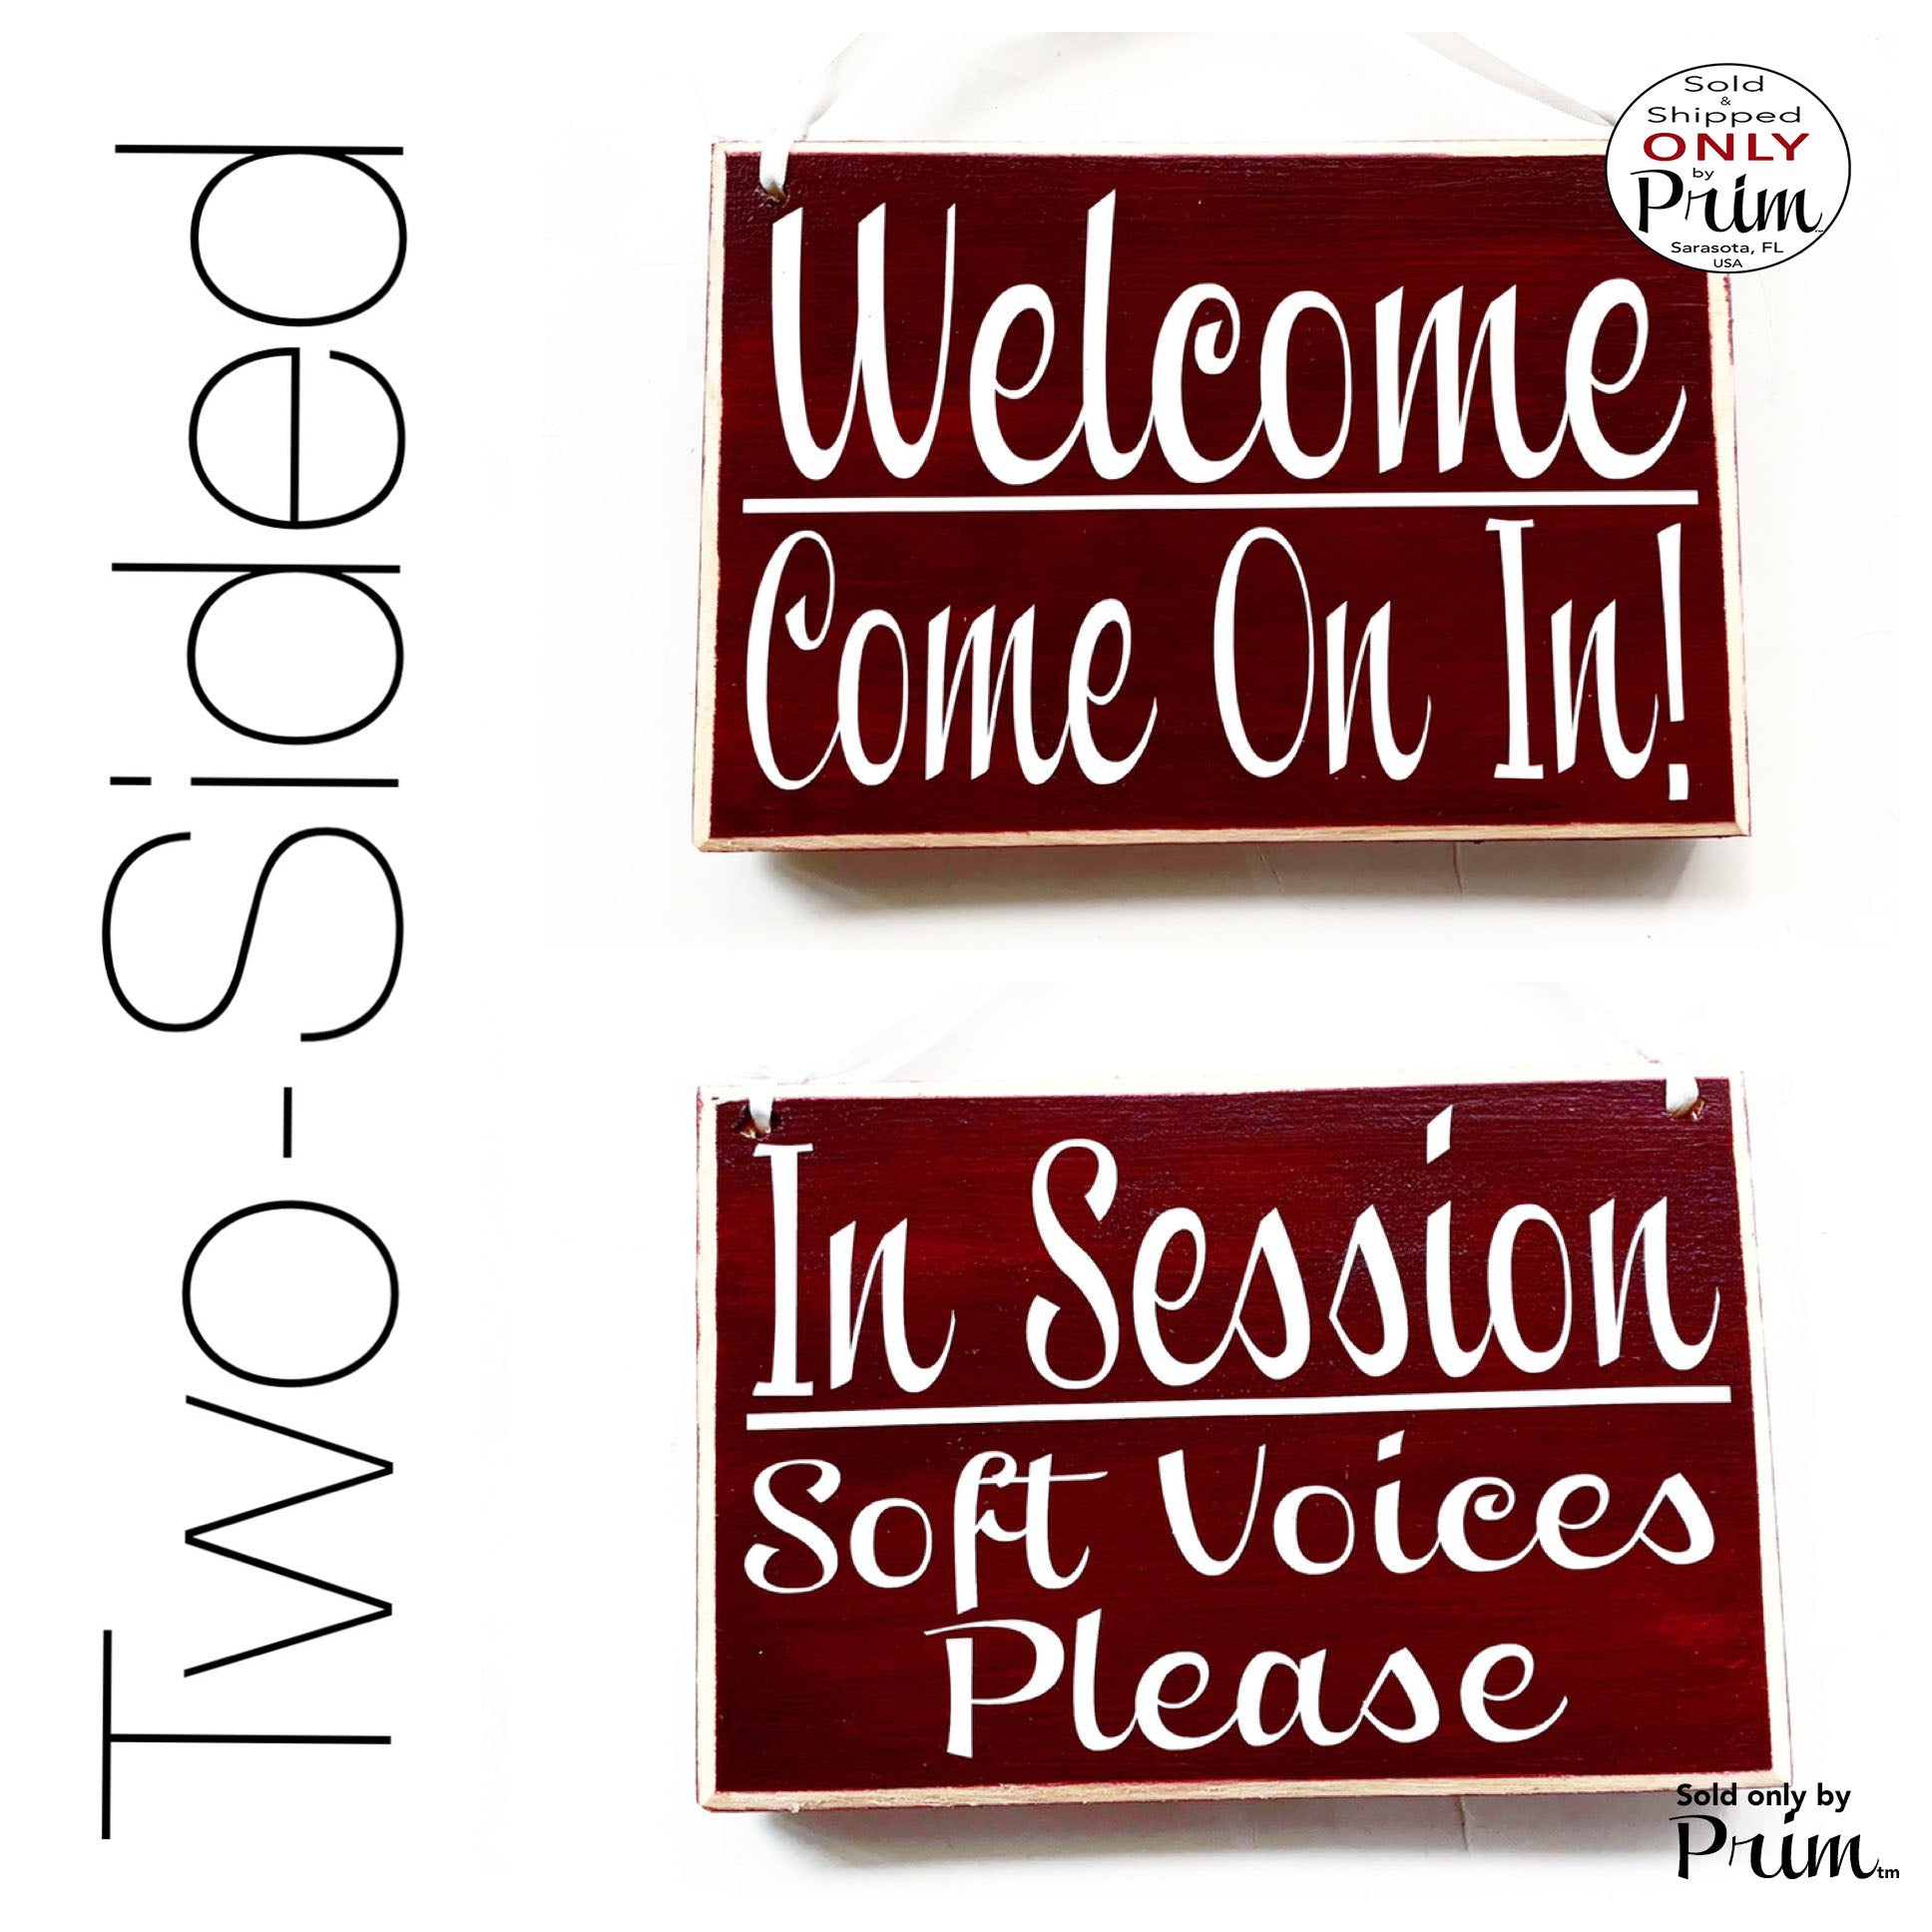 8x6 Welcome Come On In In Session Soft Voices Please Custom Wood Sign | Please Do Not Disturb Office In Progress Shhh Door Plaque Designs by Prim